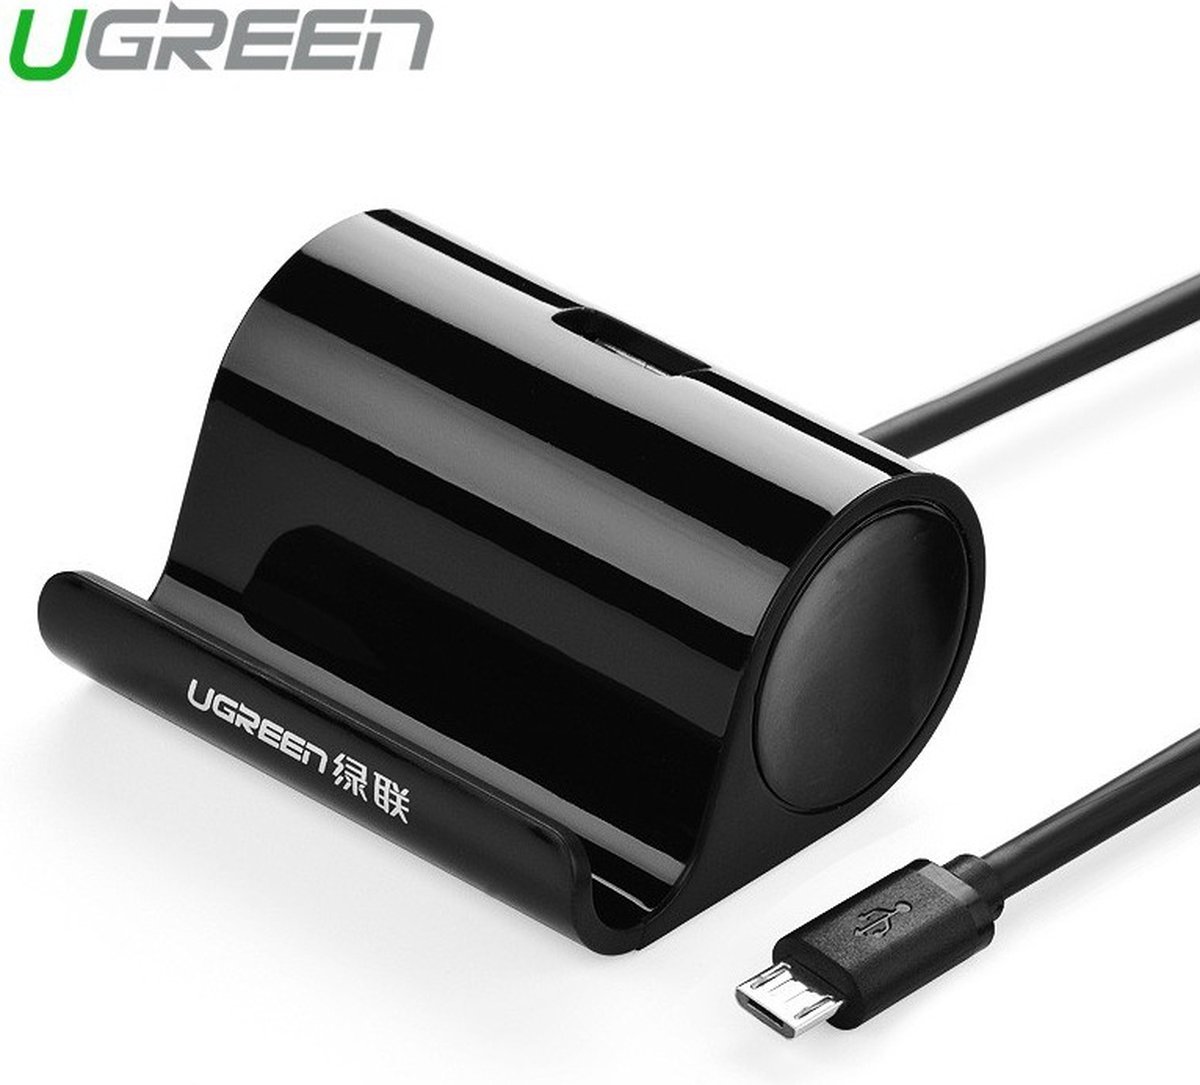 Ugreen Micro USB OTG Cable Adapter with Cradle 50cm - Zwart